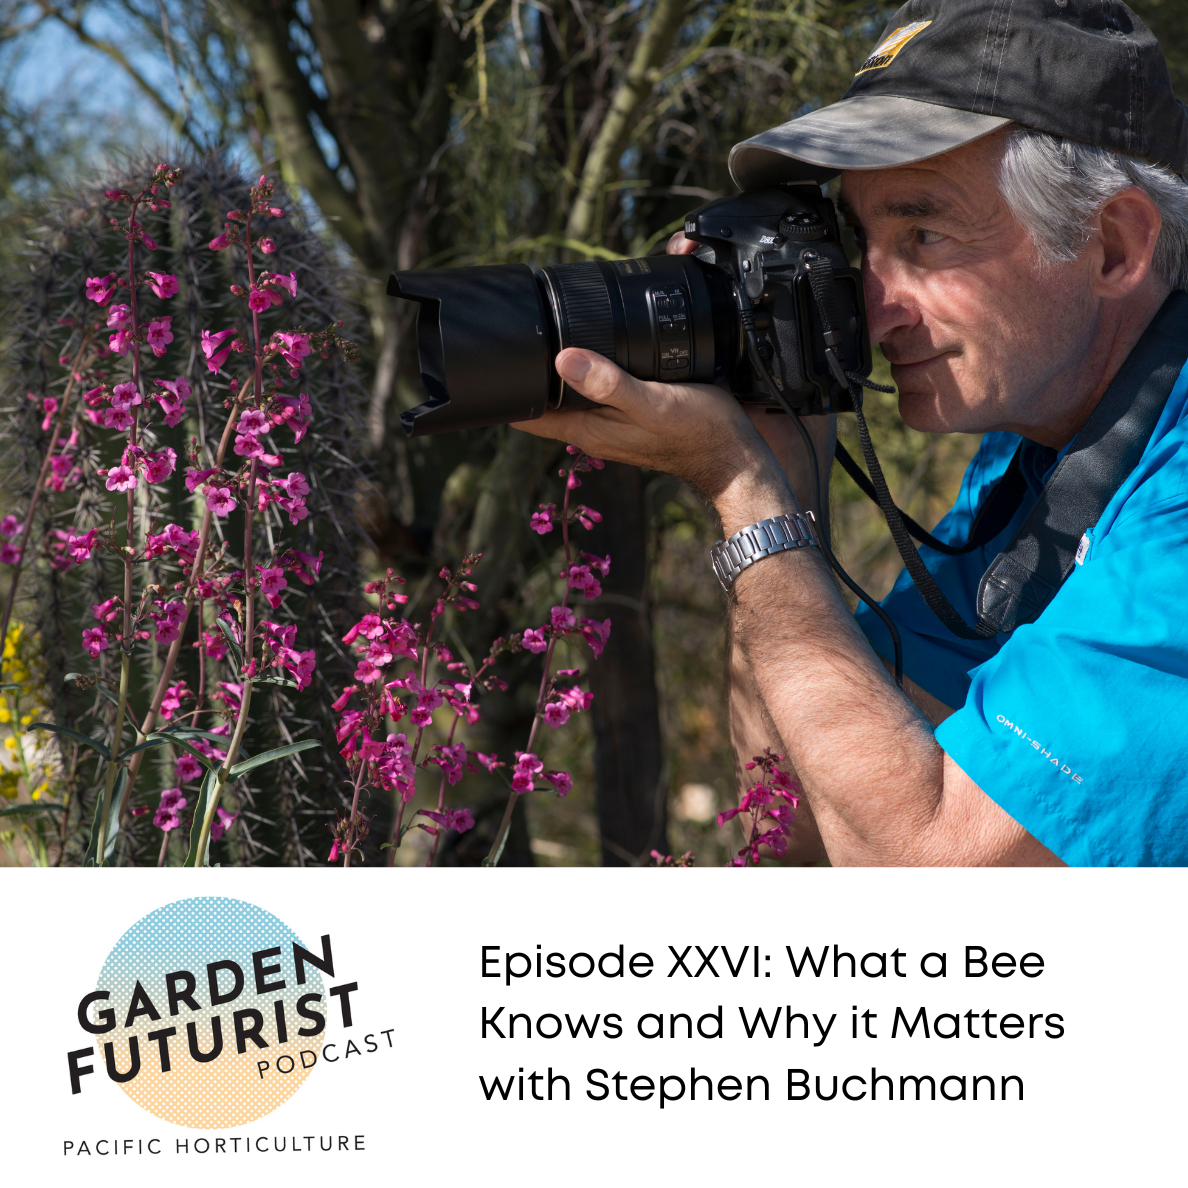 Episode XXVI: What a Bee Knows and Why it Matters with Stephen Buchmann